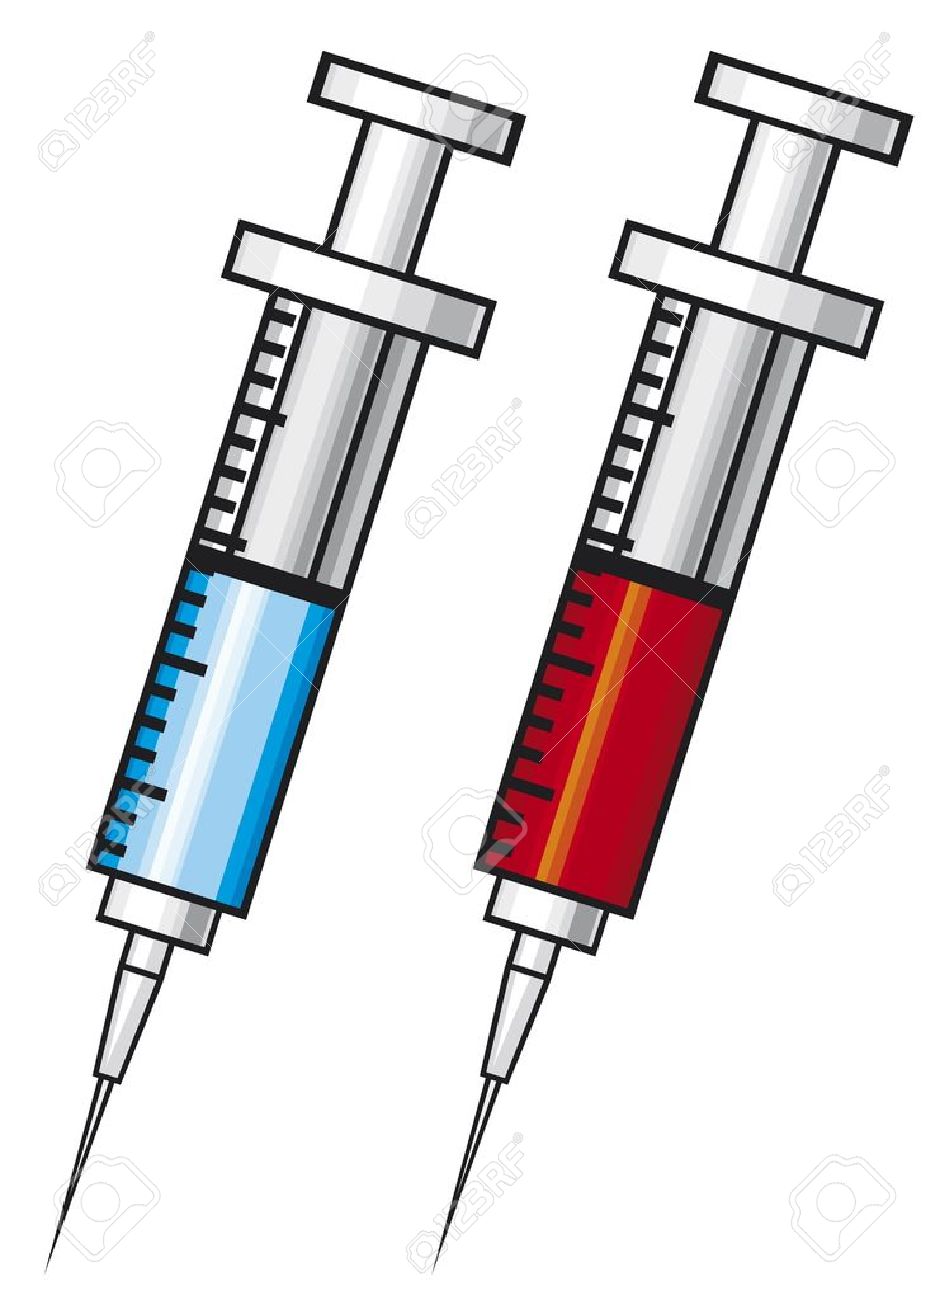 Injection clipart free.